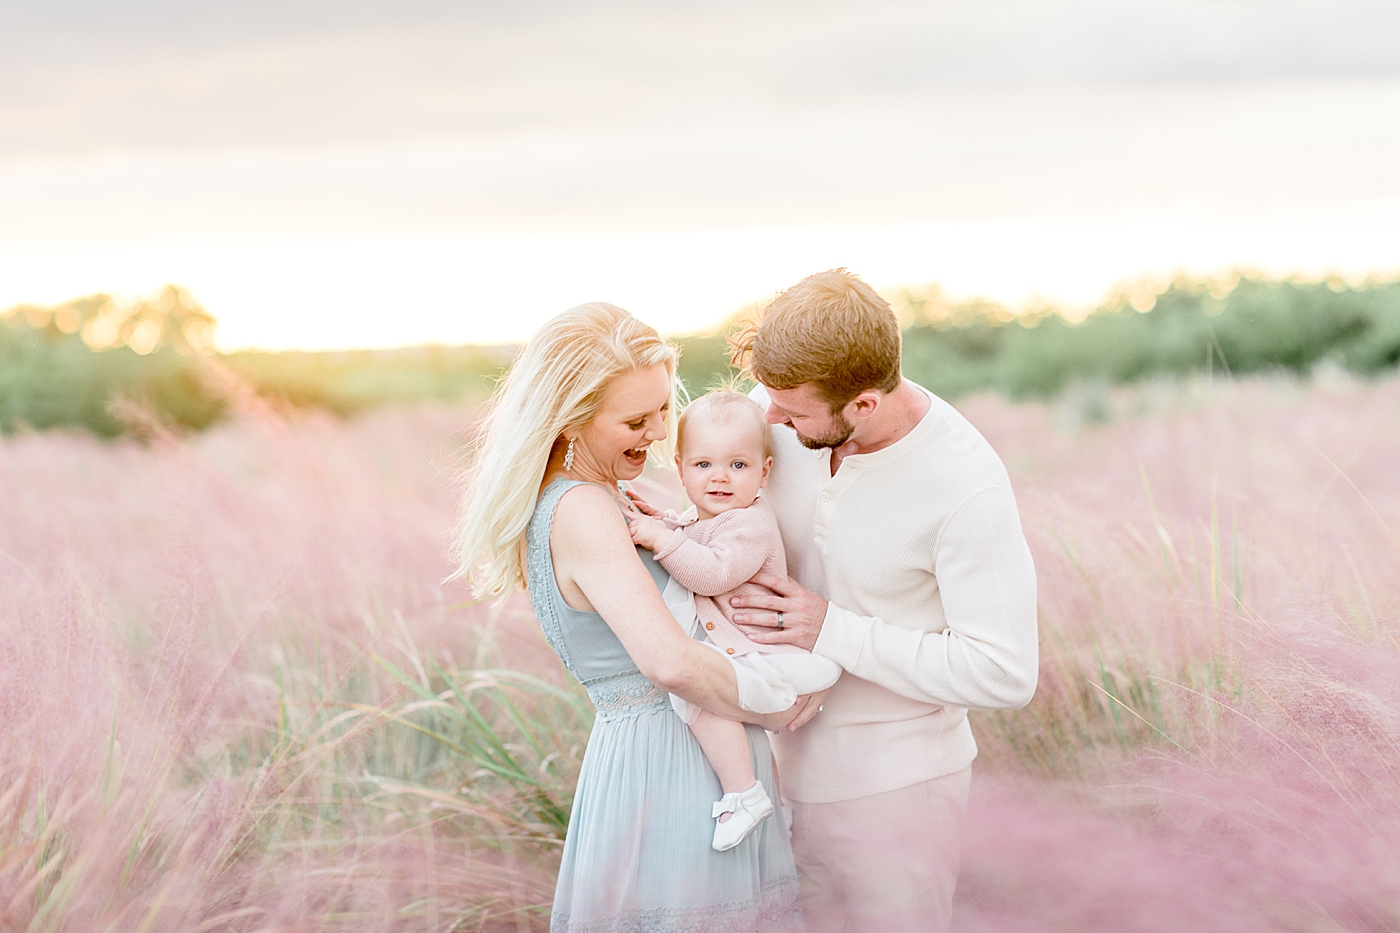 Sunset family session in Tampa, FL. Photo by Brittany Elise Photography.